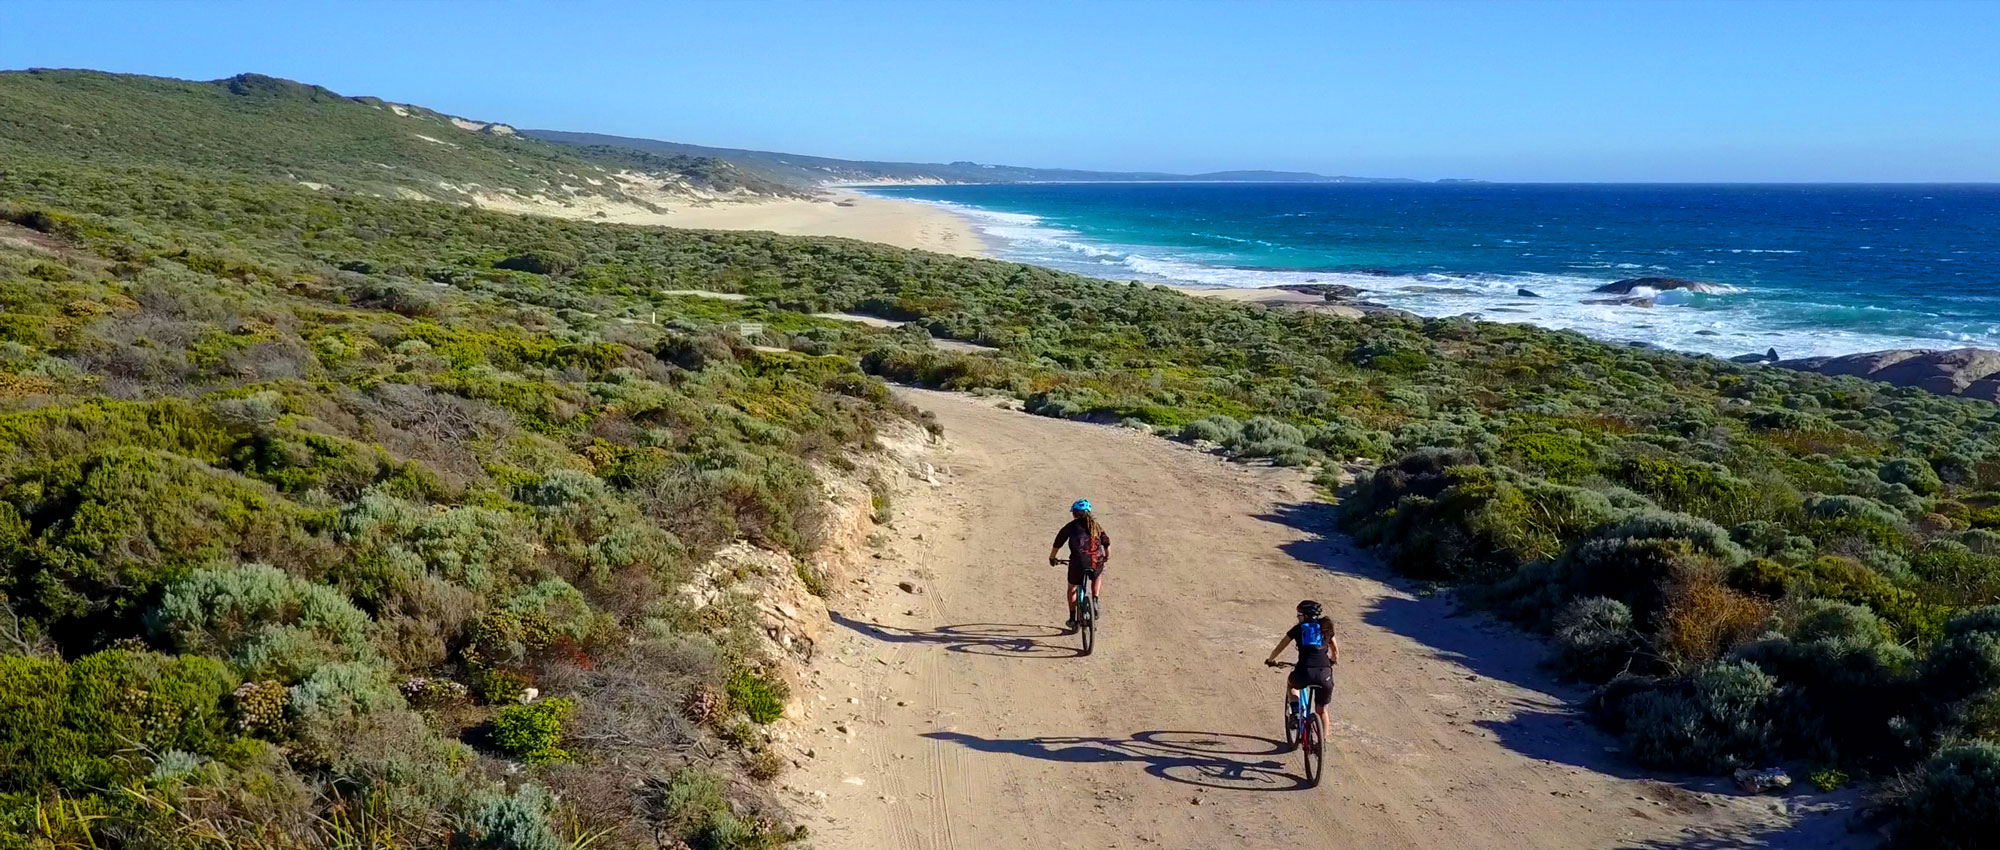 Discover Margaret River by bike